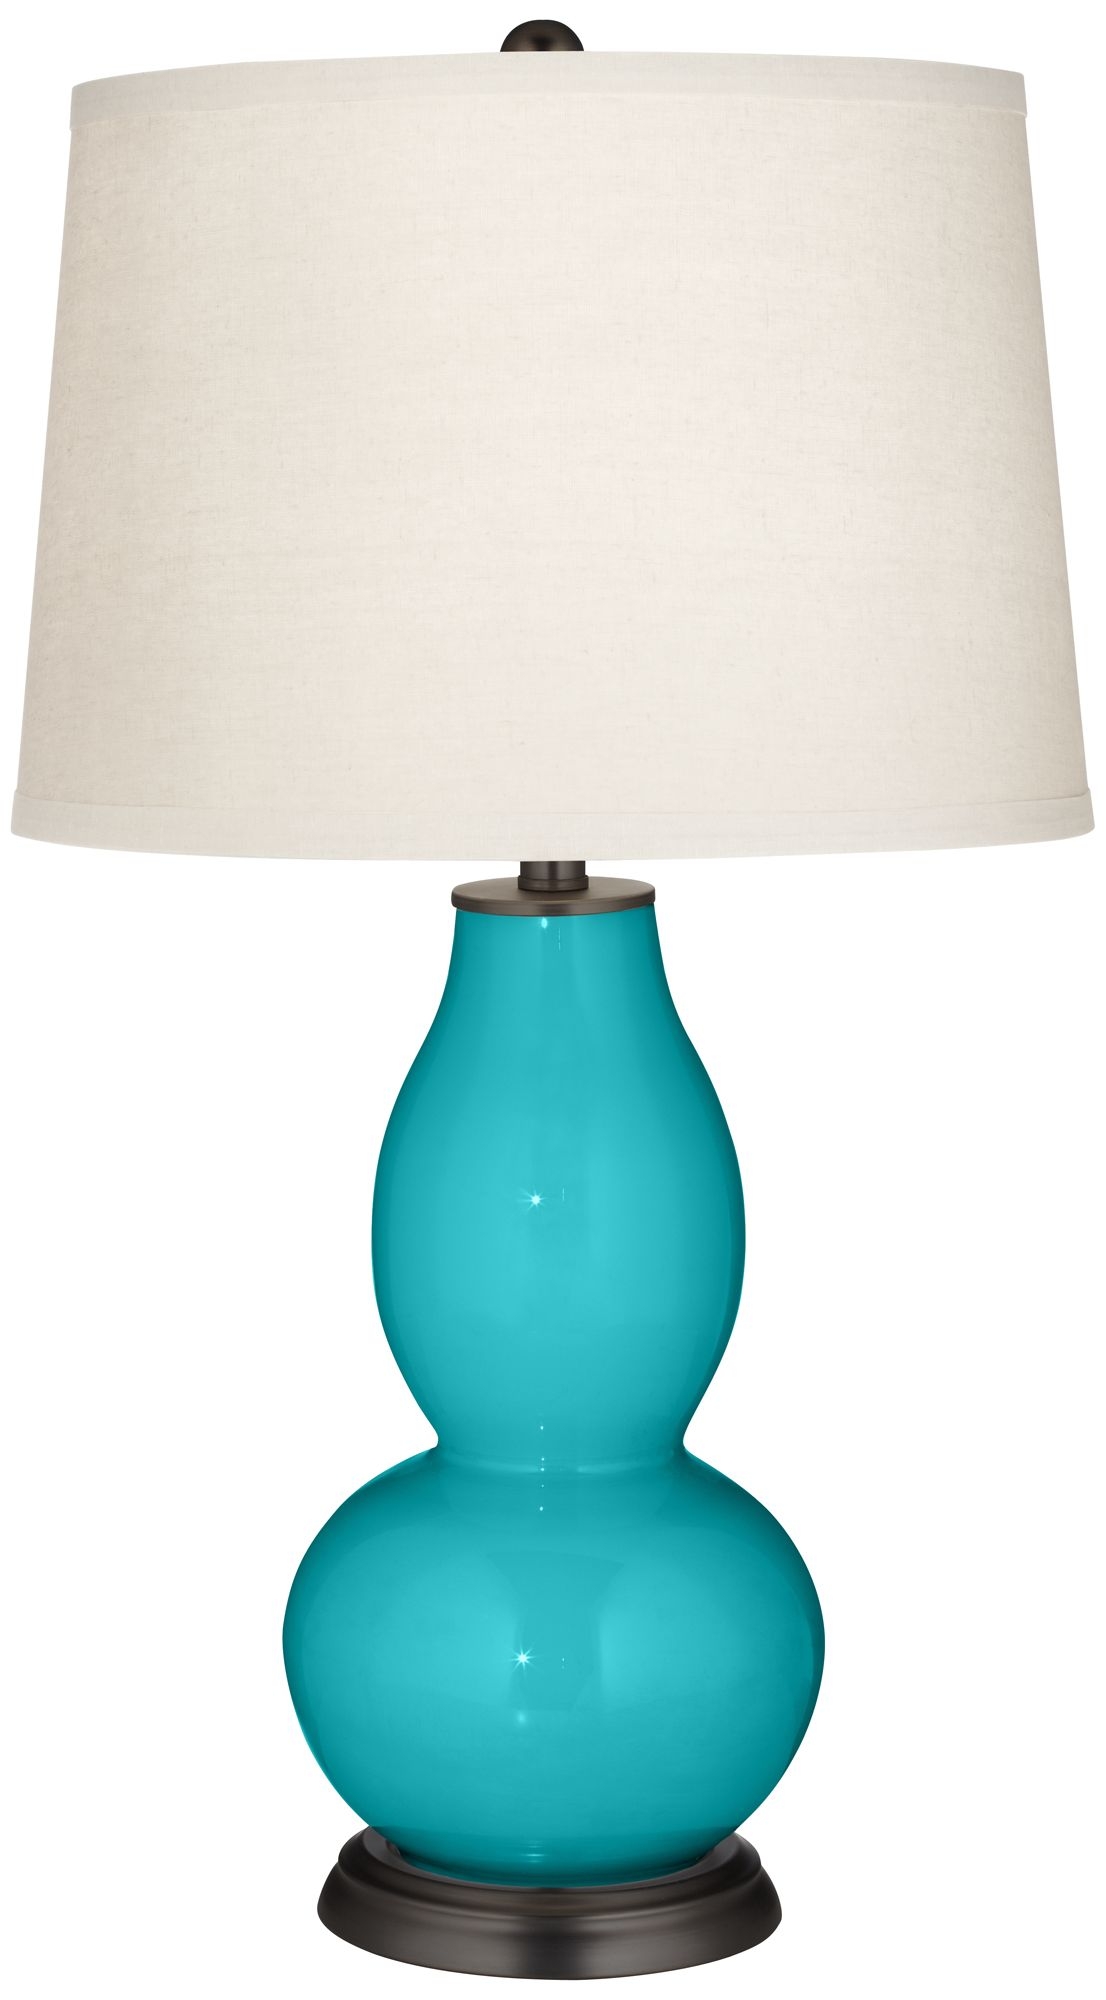 Surfer Blue Double Gourd Table Lamp - Image 0